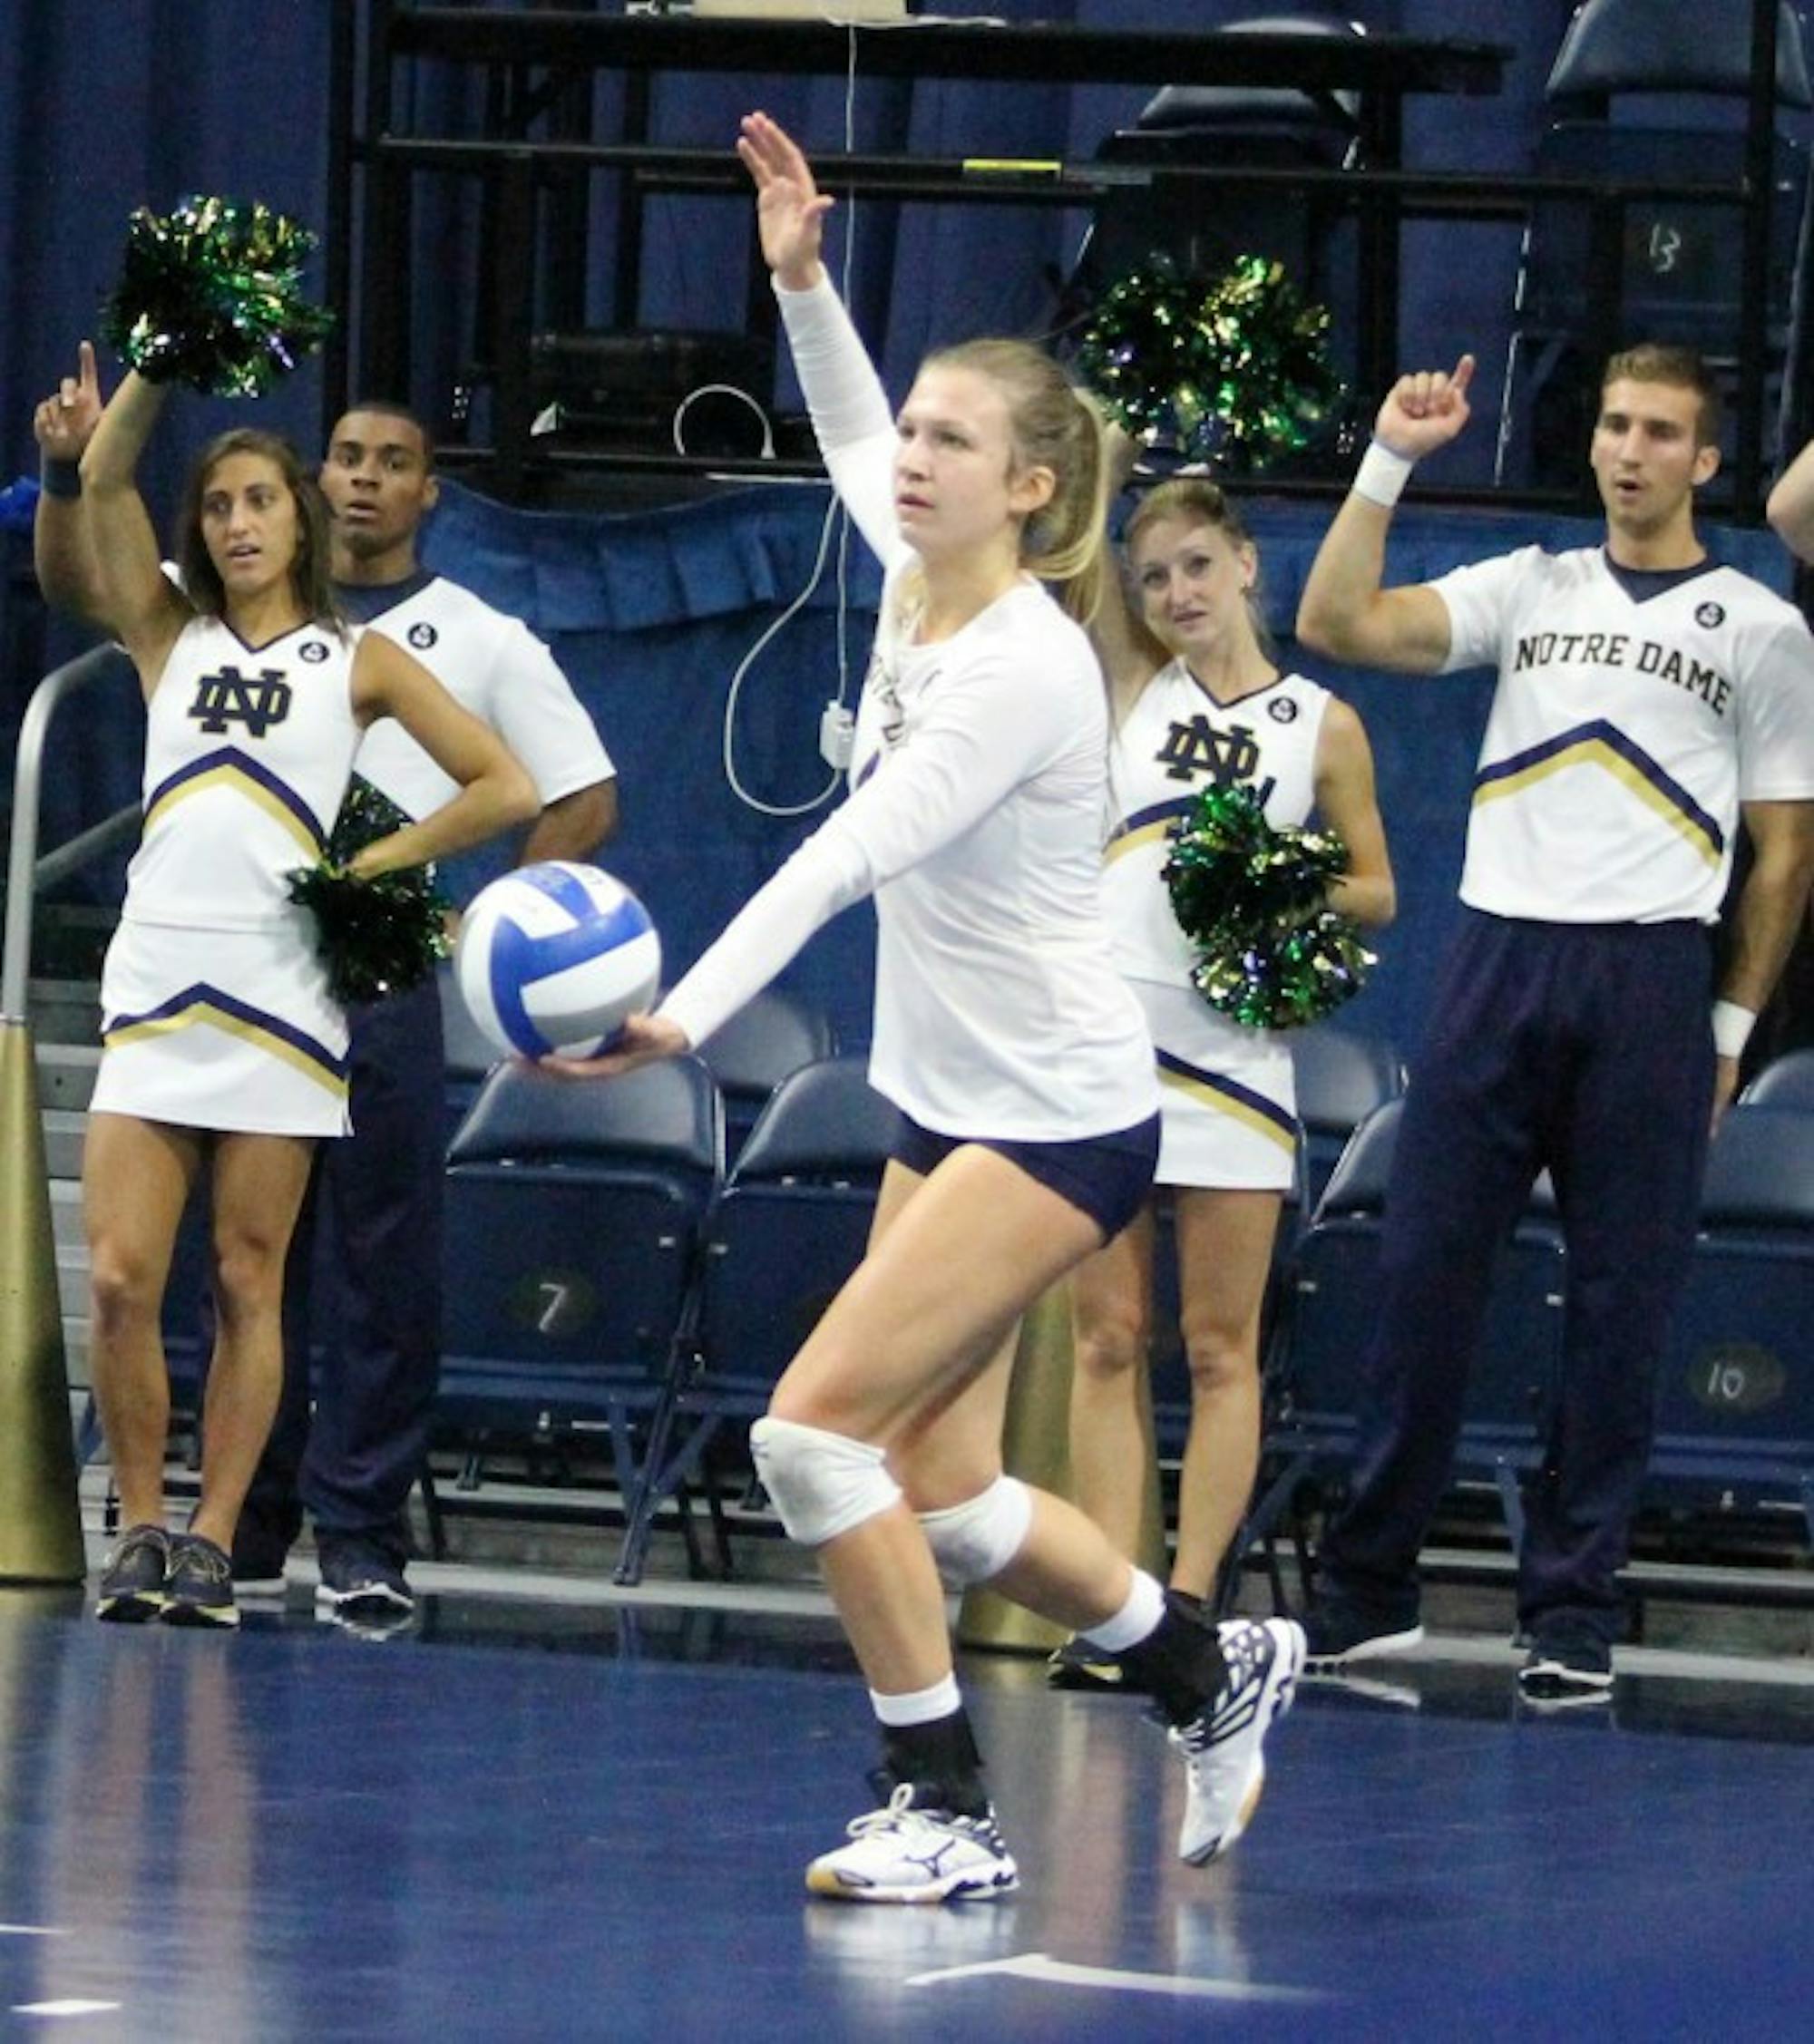 Freshman libero Ryann DeJarld sets up for a serve during Notre Dame’s 3-2 loss against Syracuse on Oct. 4 at Purcell Pavilion.